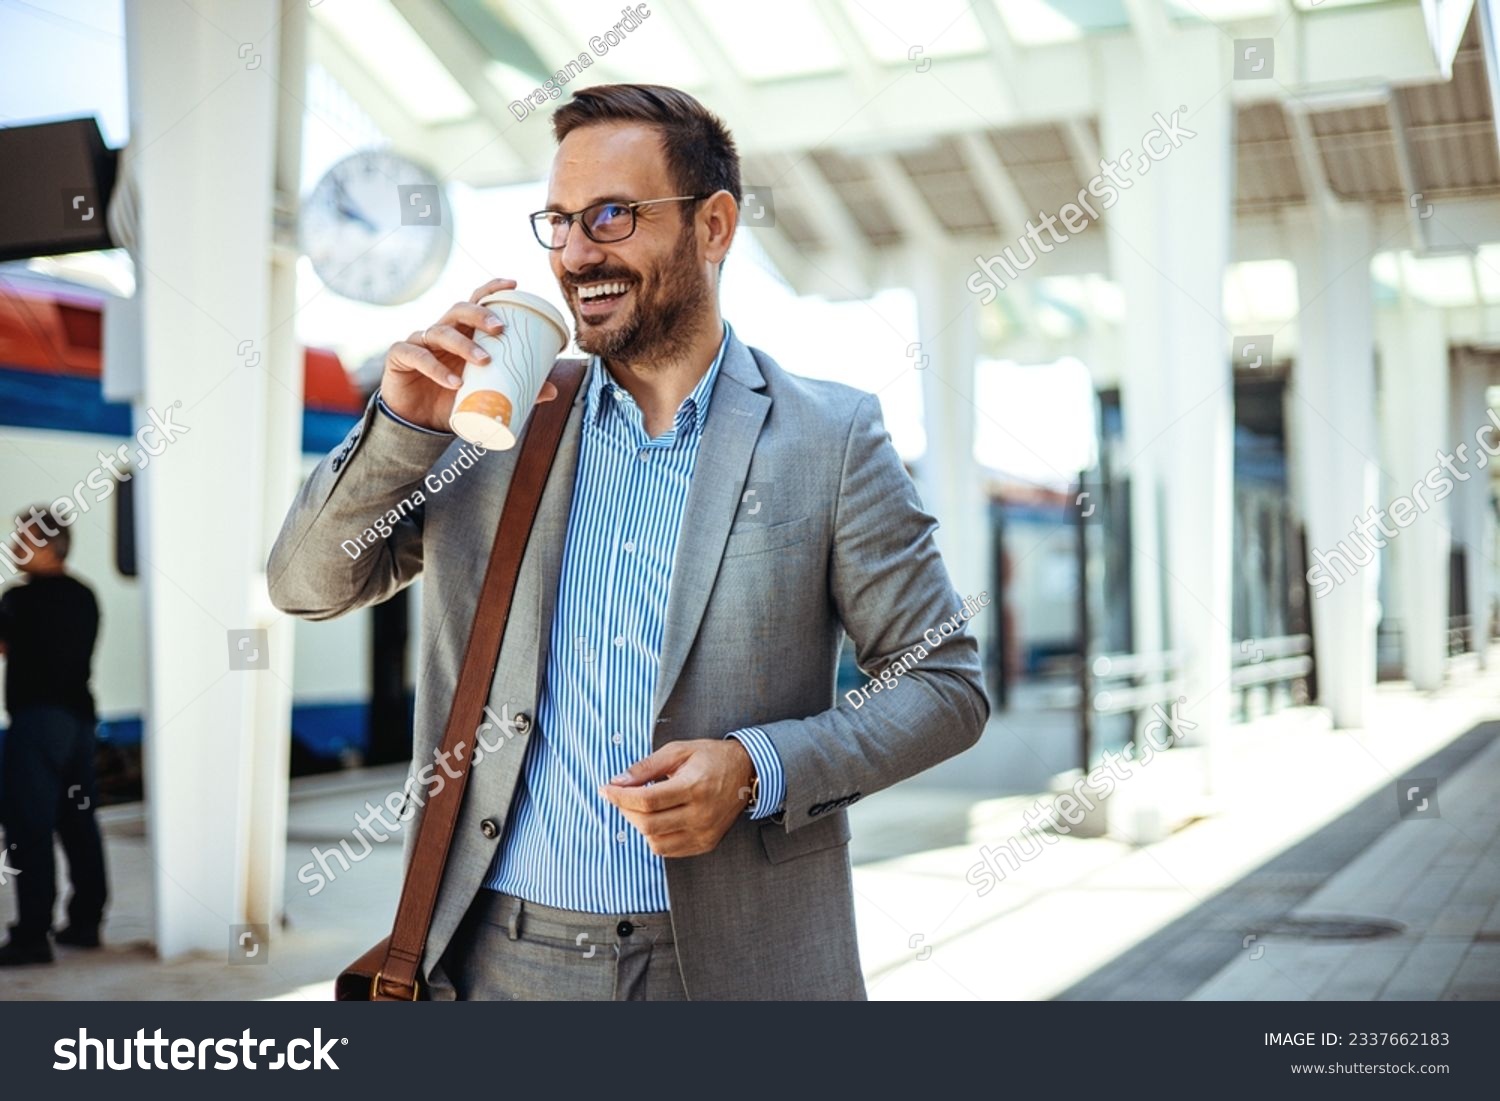 Businessman holding a disposable coffee cup at the train station platform. A man in a train station commuting to work. Businessman with coffee cup. Business person is waiting for train  #2337662183